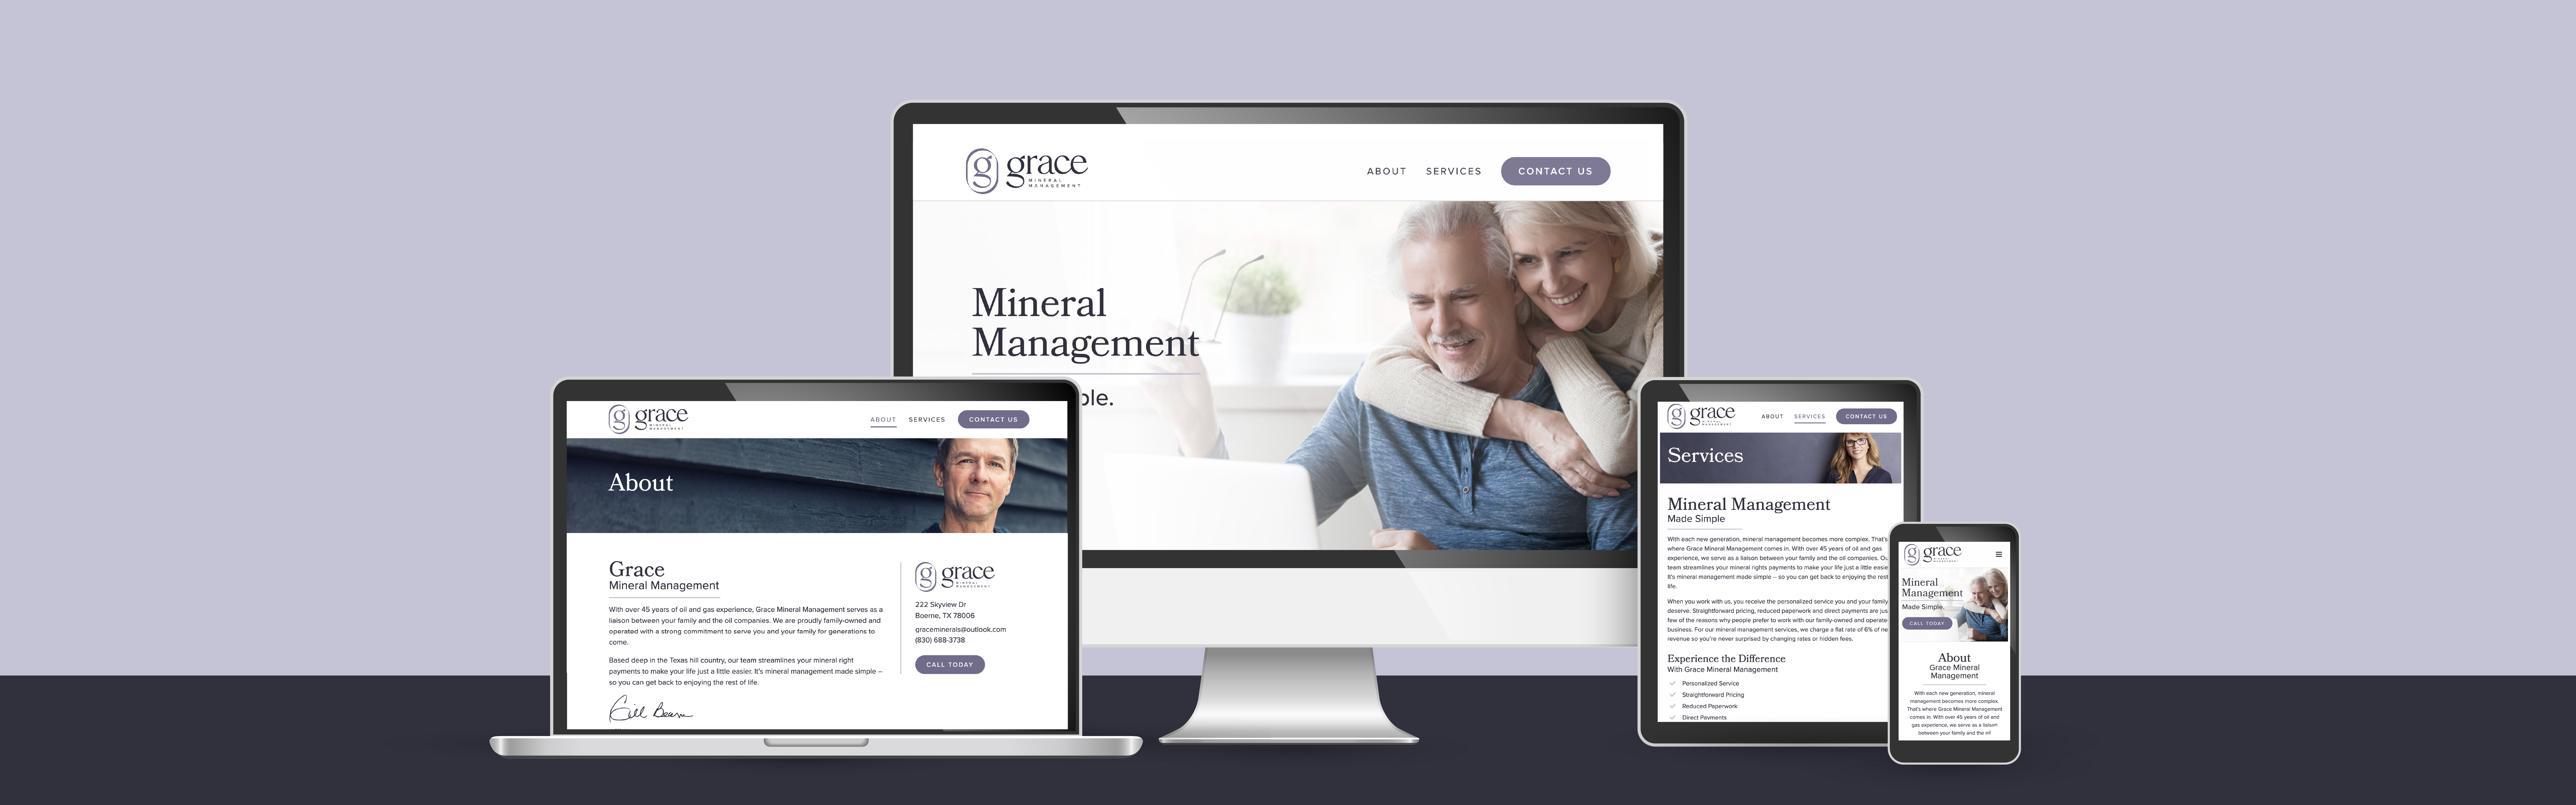 A display of a responsive website design shown across multiple devices: a desktop computer, a tablet, and a smartphone, all with matching content about Grace Mineral Management.